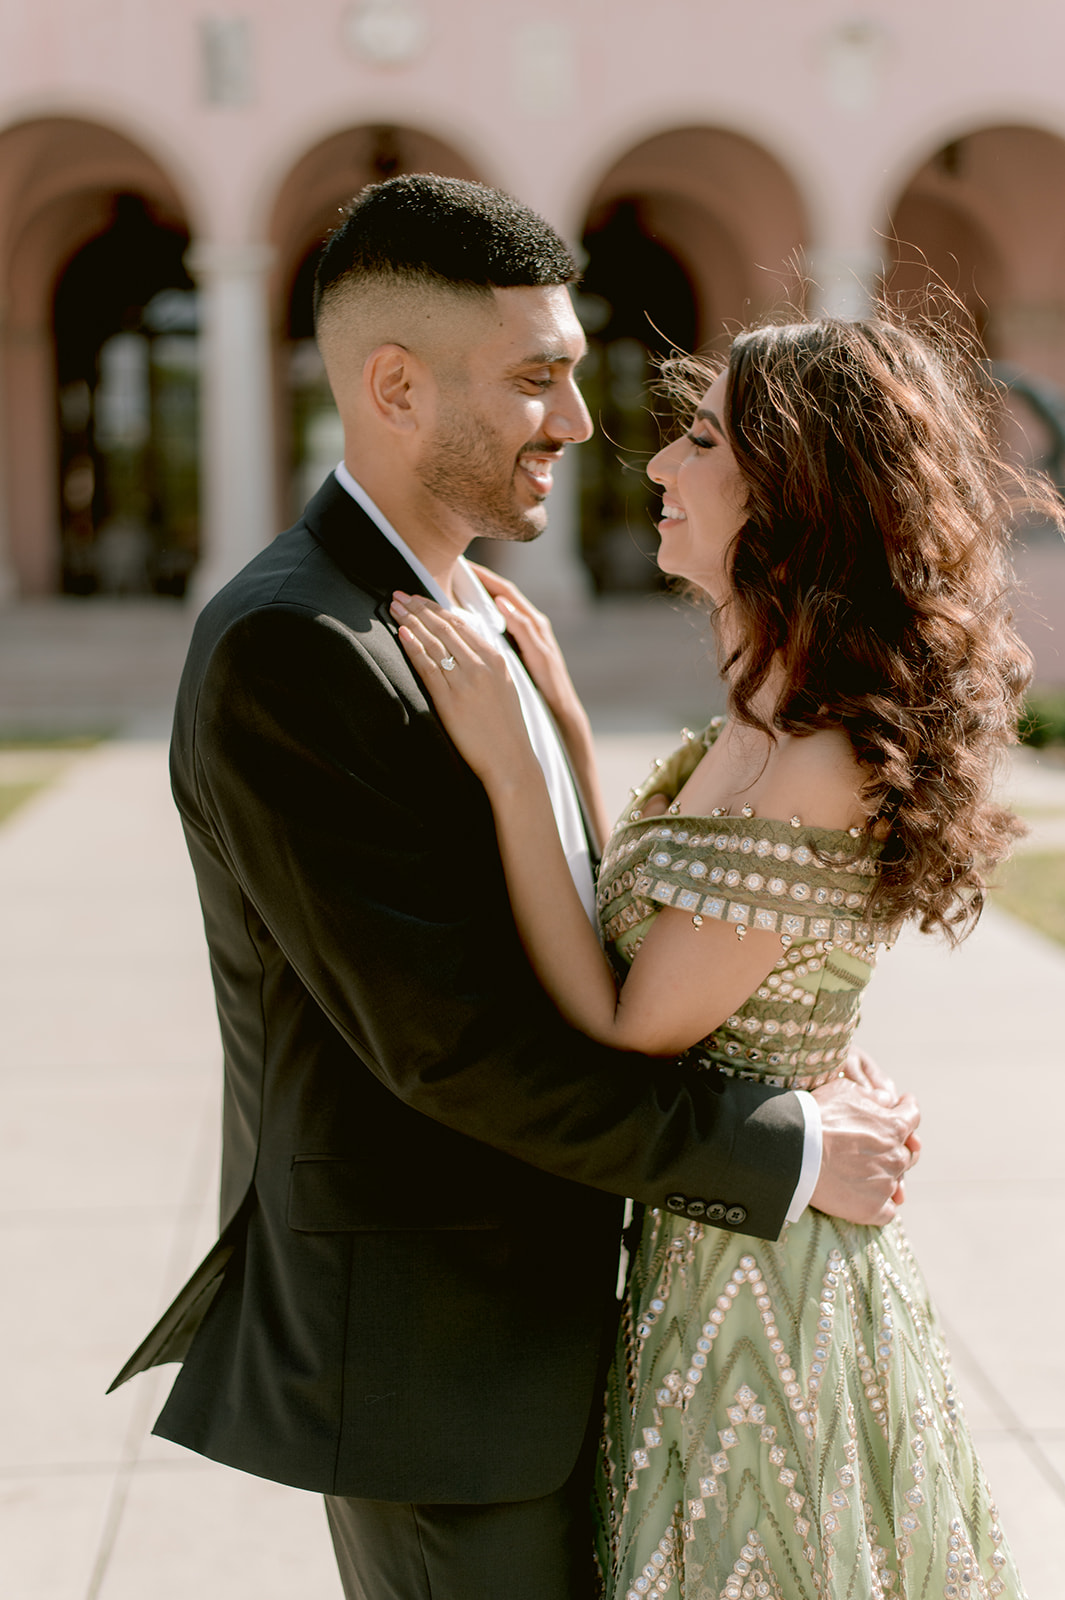 "Indian engagement session with the Ringling Museum's Ca' d'Zan as a beautiful setting"
